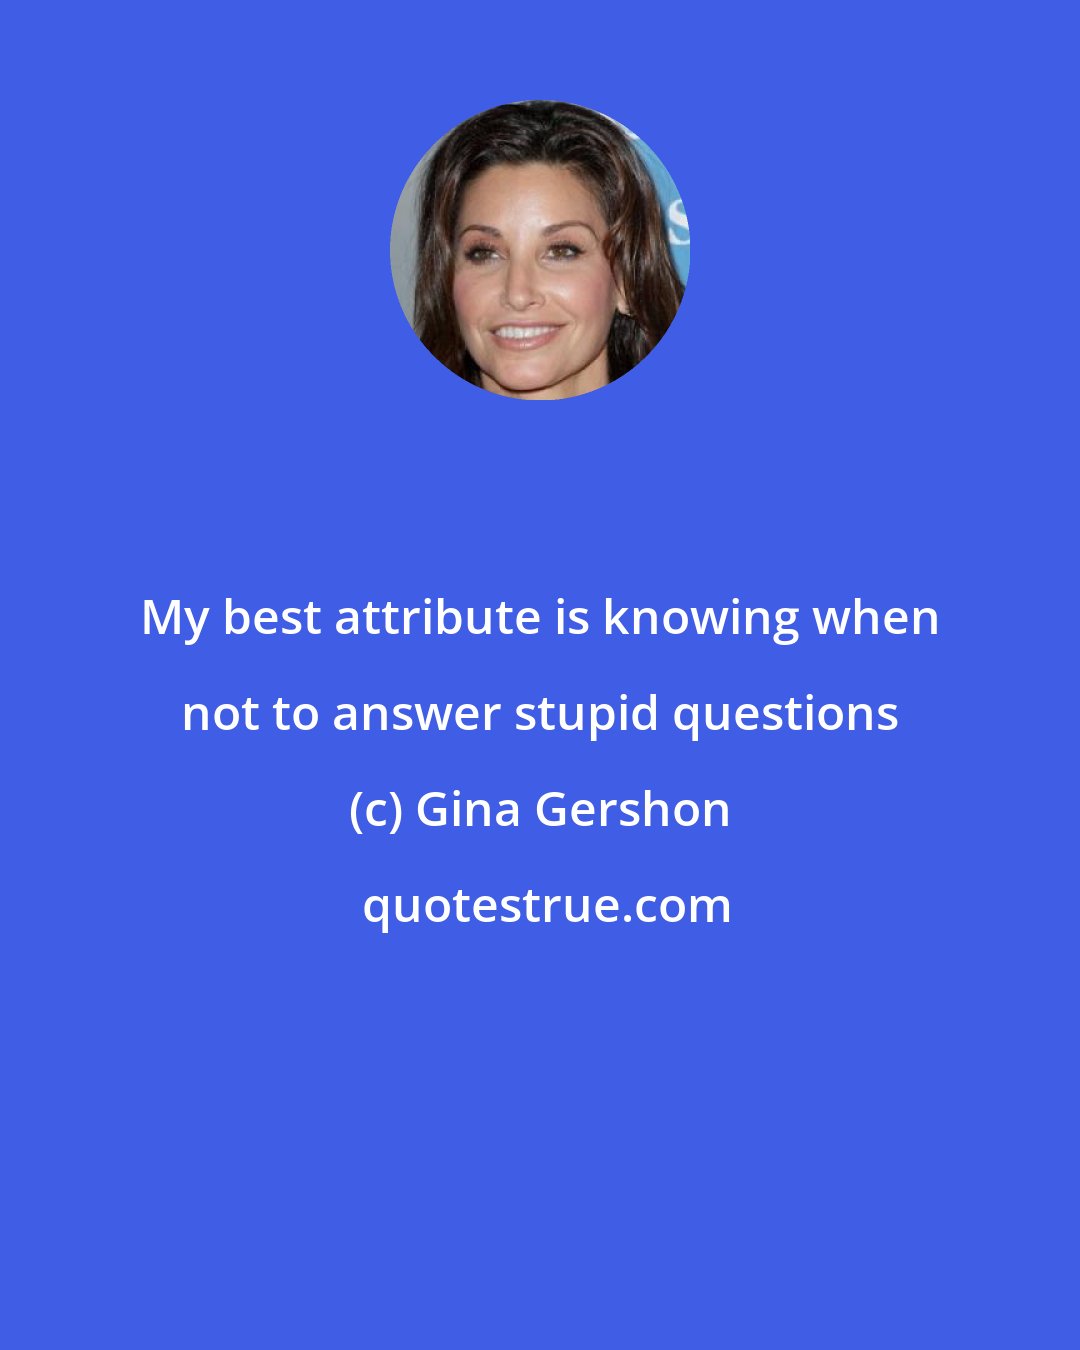 Gina Gershon: My best attribute is knowing when not to answer stupid questions